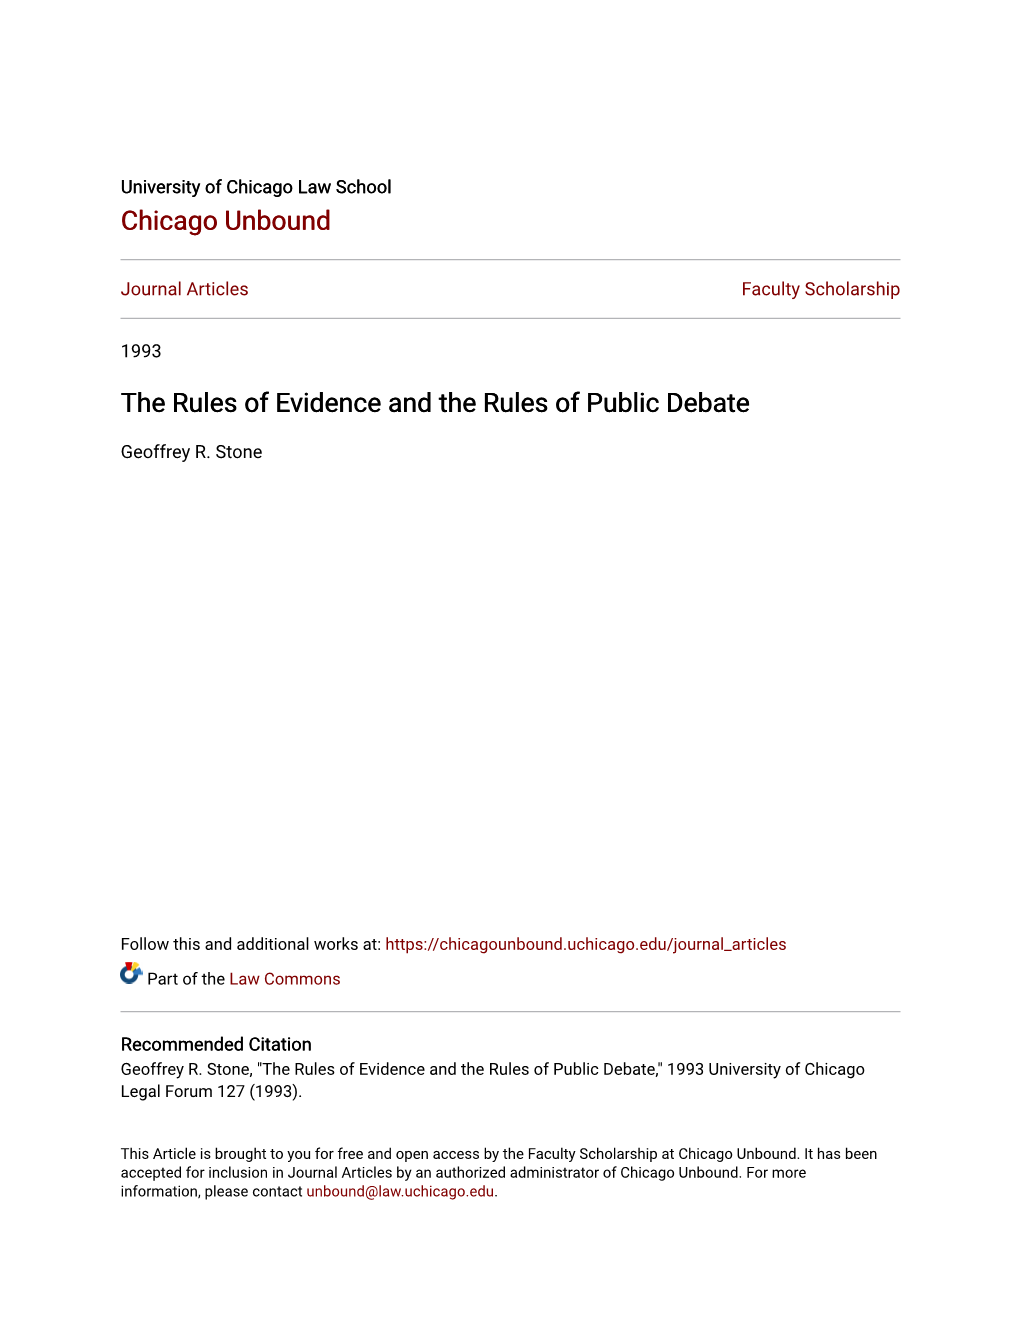 The Rules of Evidence and the Rules of Public Debate